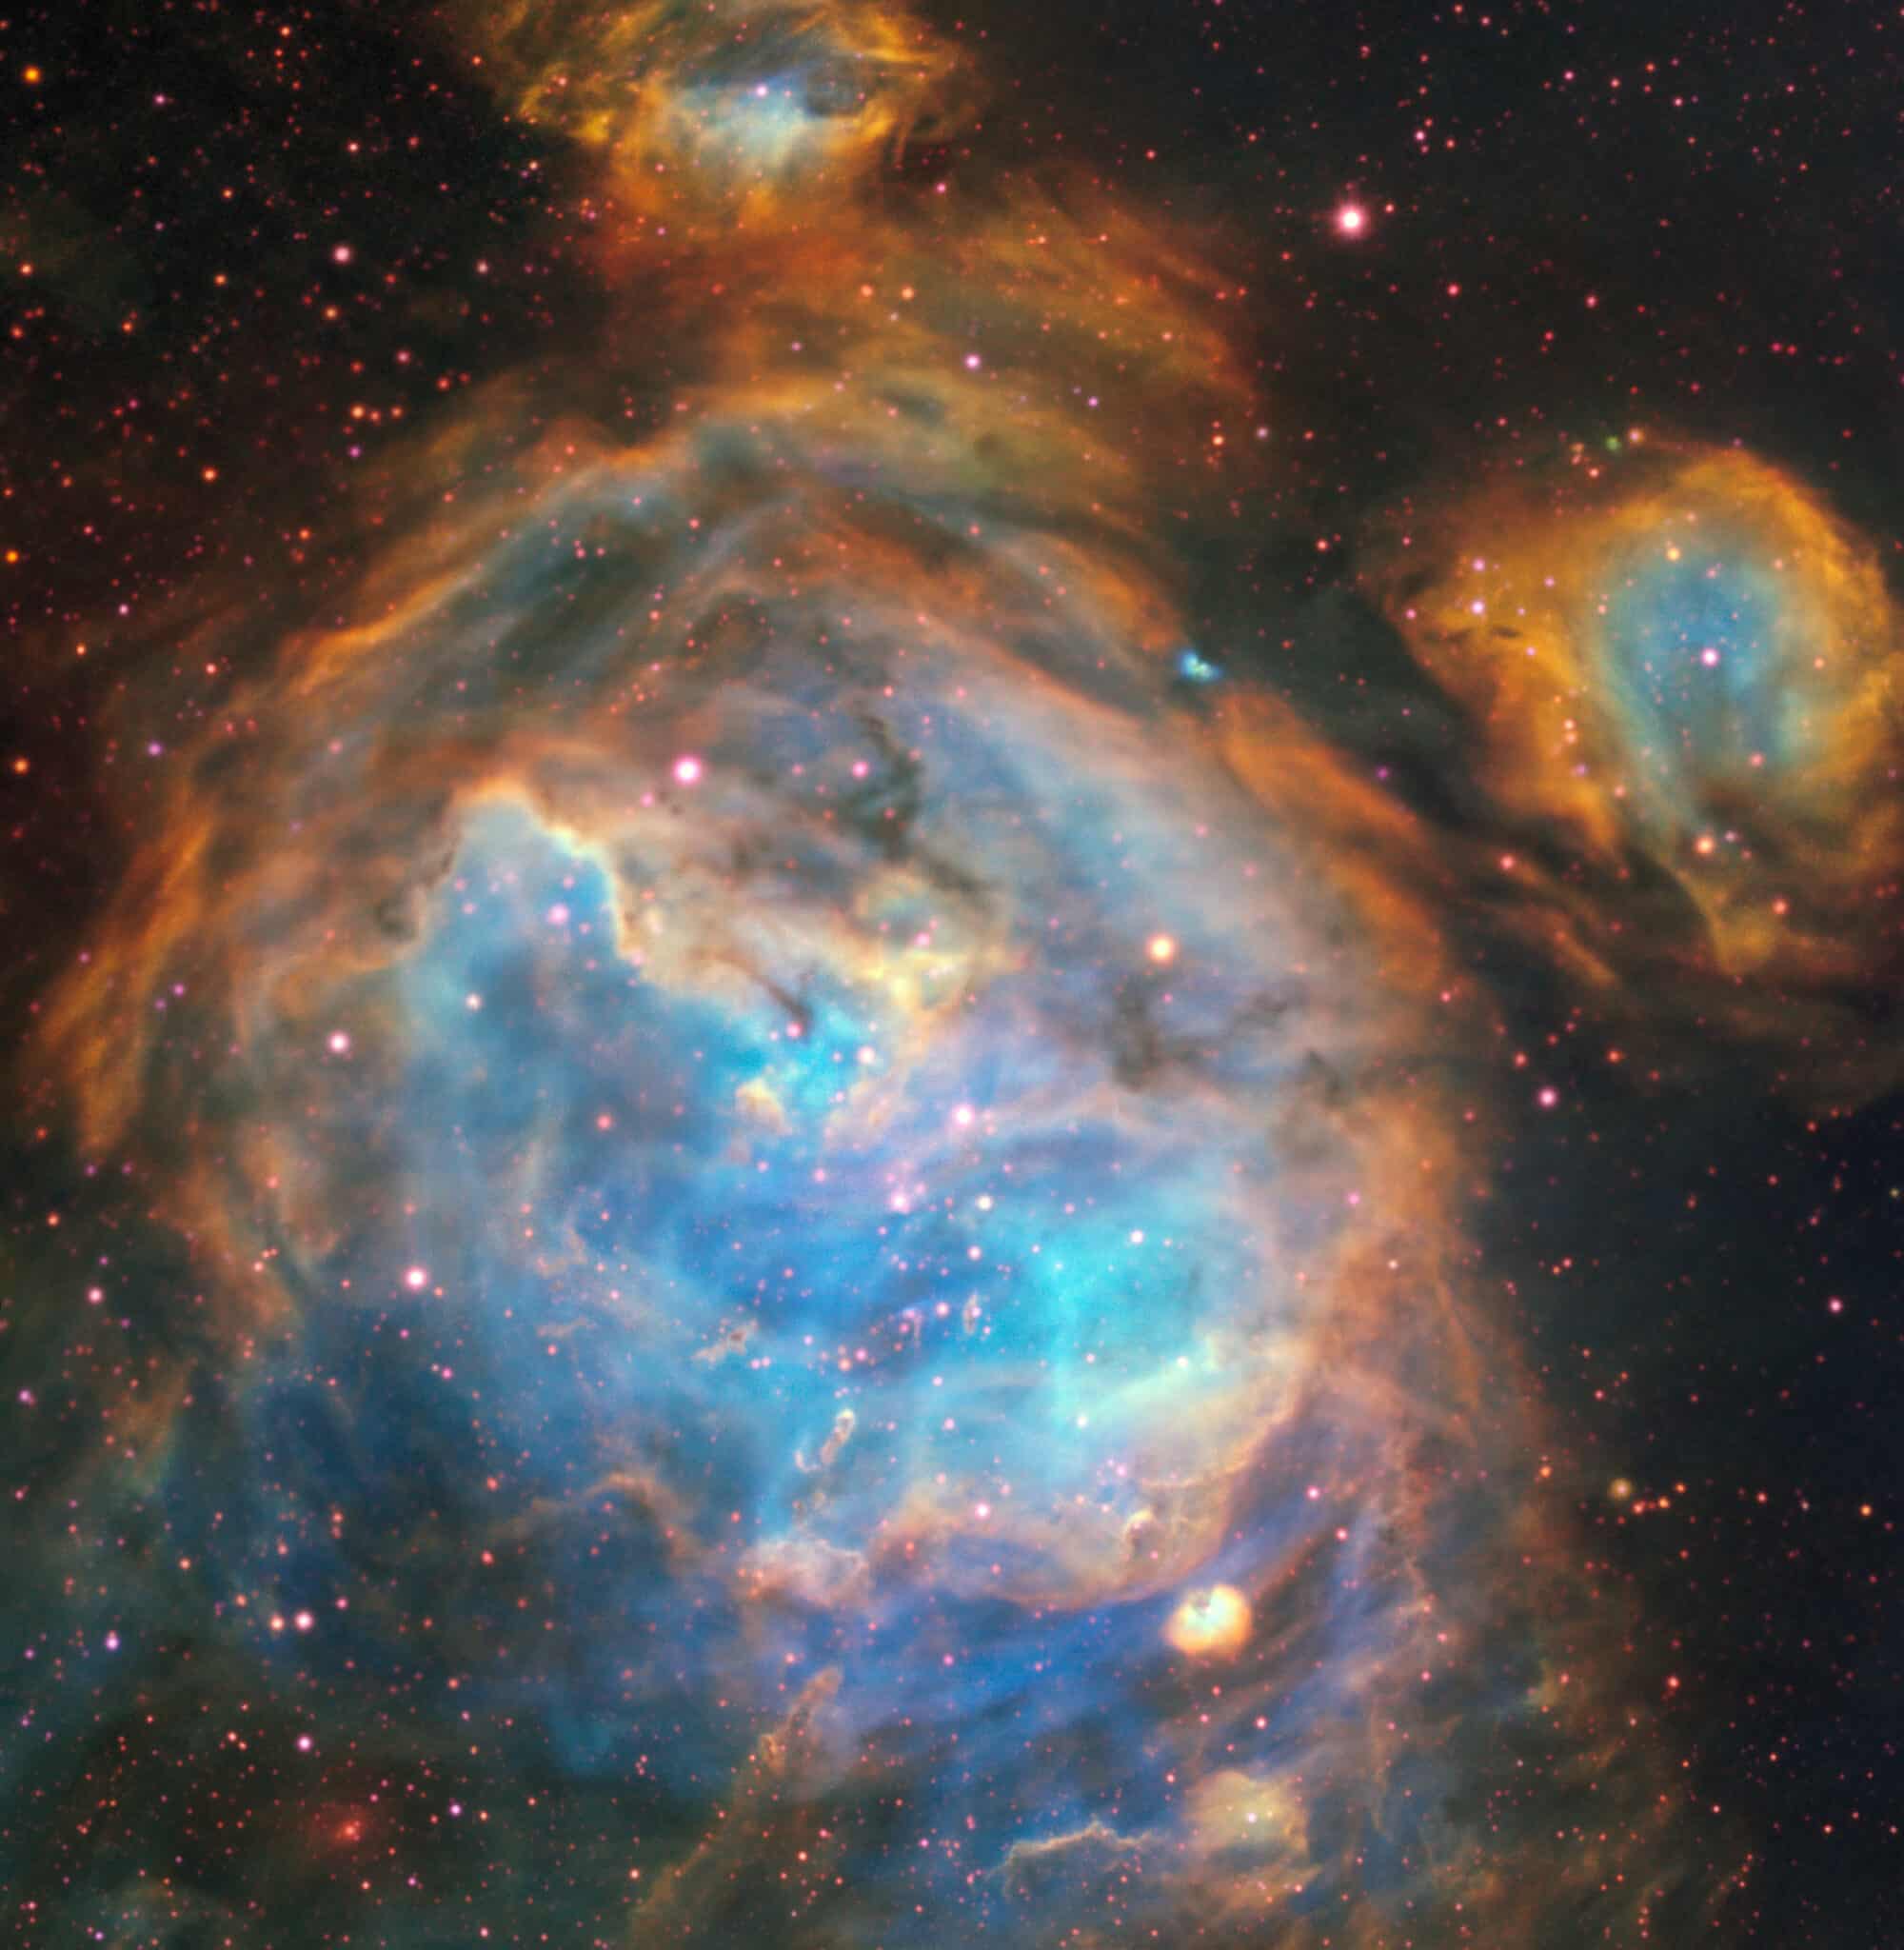 This dazzling region of newly-forming stars in the Large Magellanic Cloud (LMC) was captured by the Multi Unit Spectroscopic Explorer instrument on ESO’s Very Large Telescope.